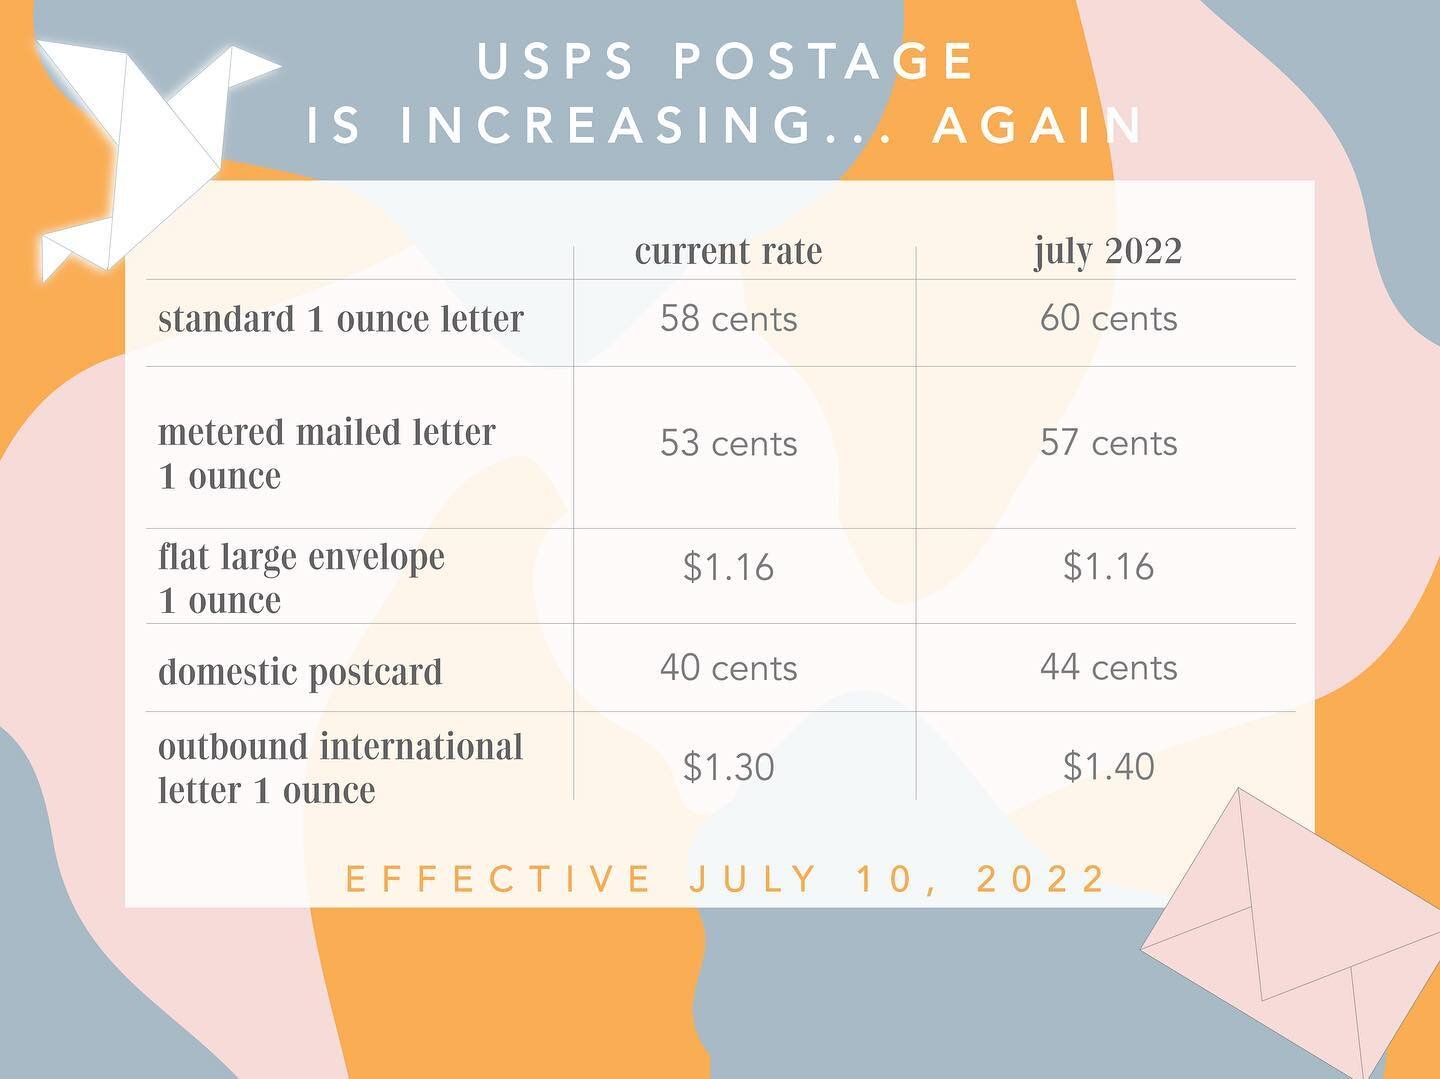 📬POSTAGE ALERT📫@uspostalservice is increasing their rates effective July 10, spread the word!